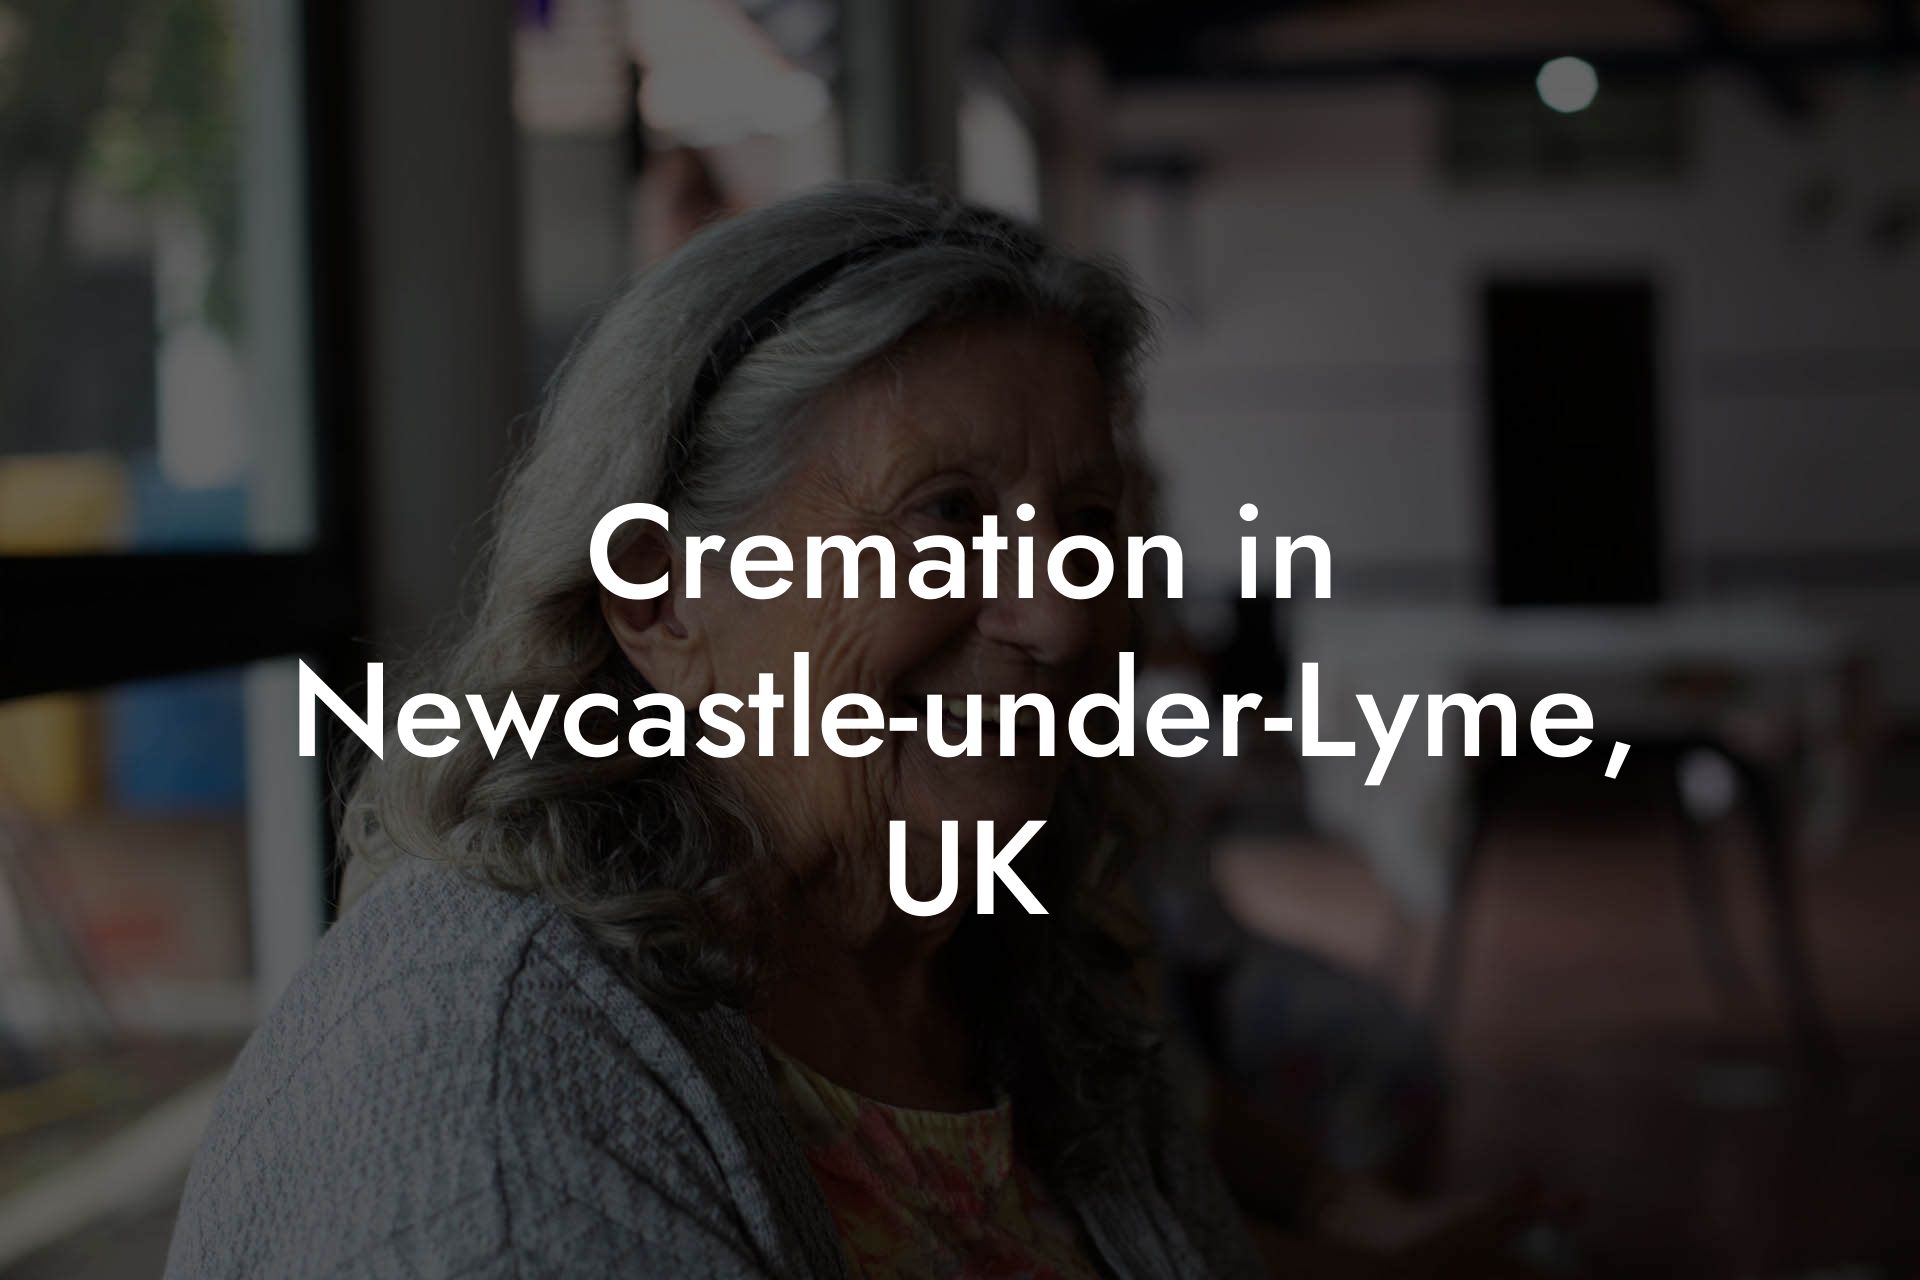 Cremation in Newcastle-under-Lyme, UK